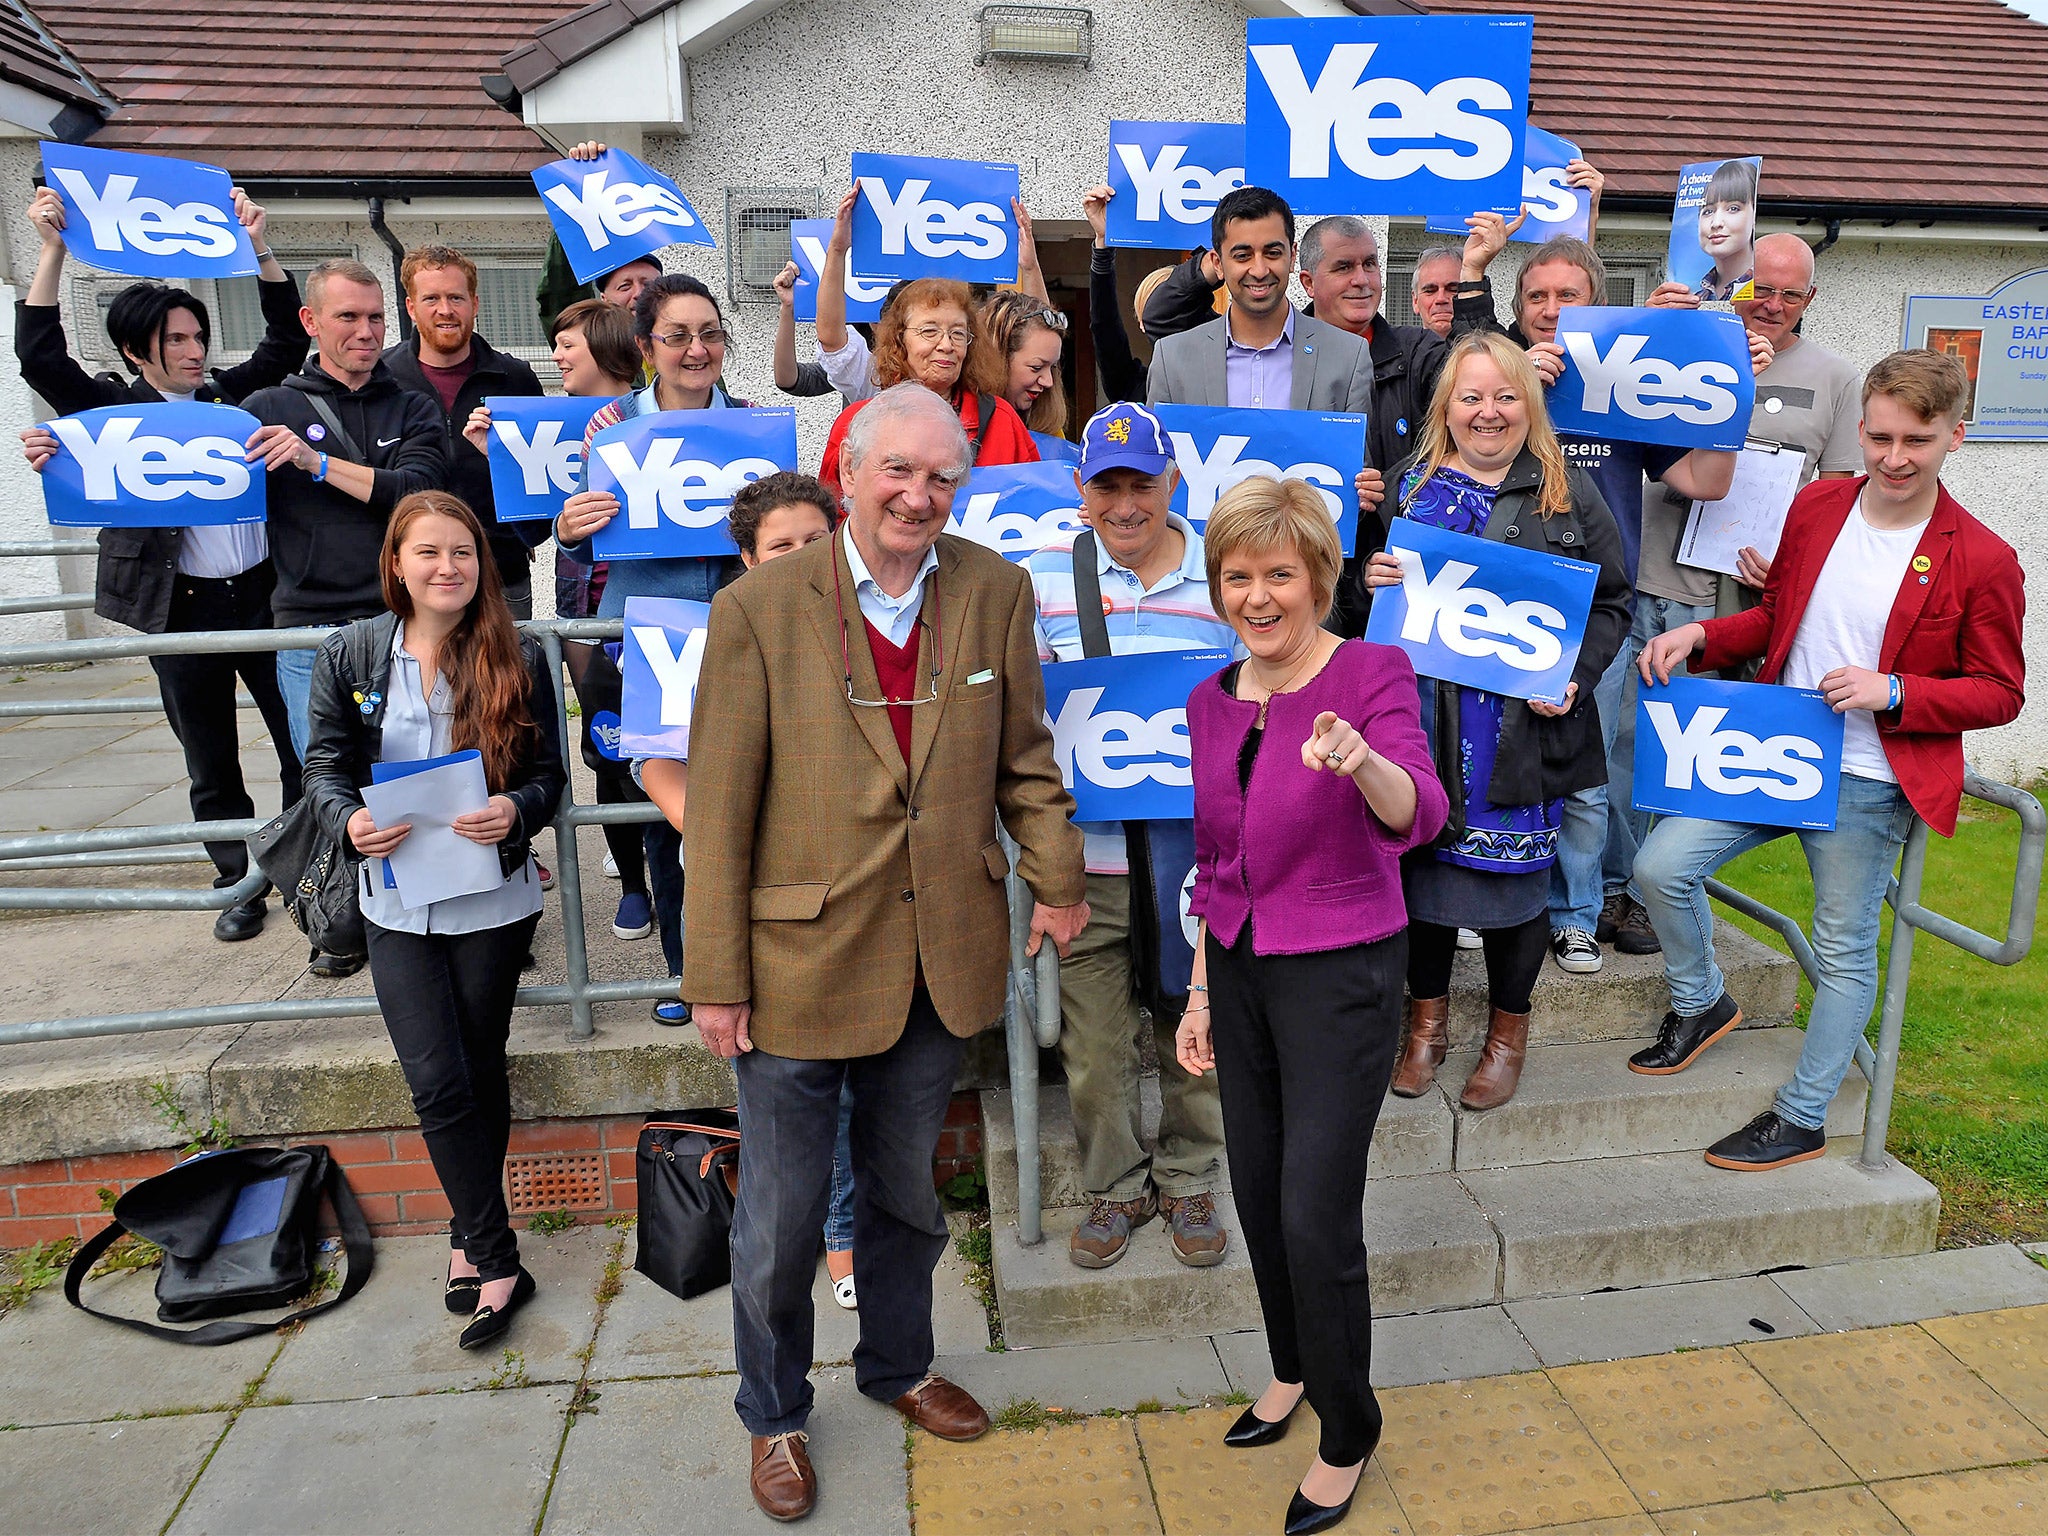 Deputy First Minister Nicola Sturgeon, and anti-poverty campaigner and lifelong Labour Party member Bob Holman pose with 'Yes' campaigners in Easterhouse